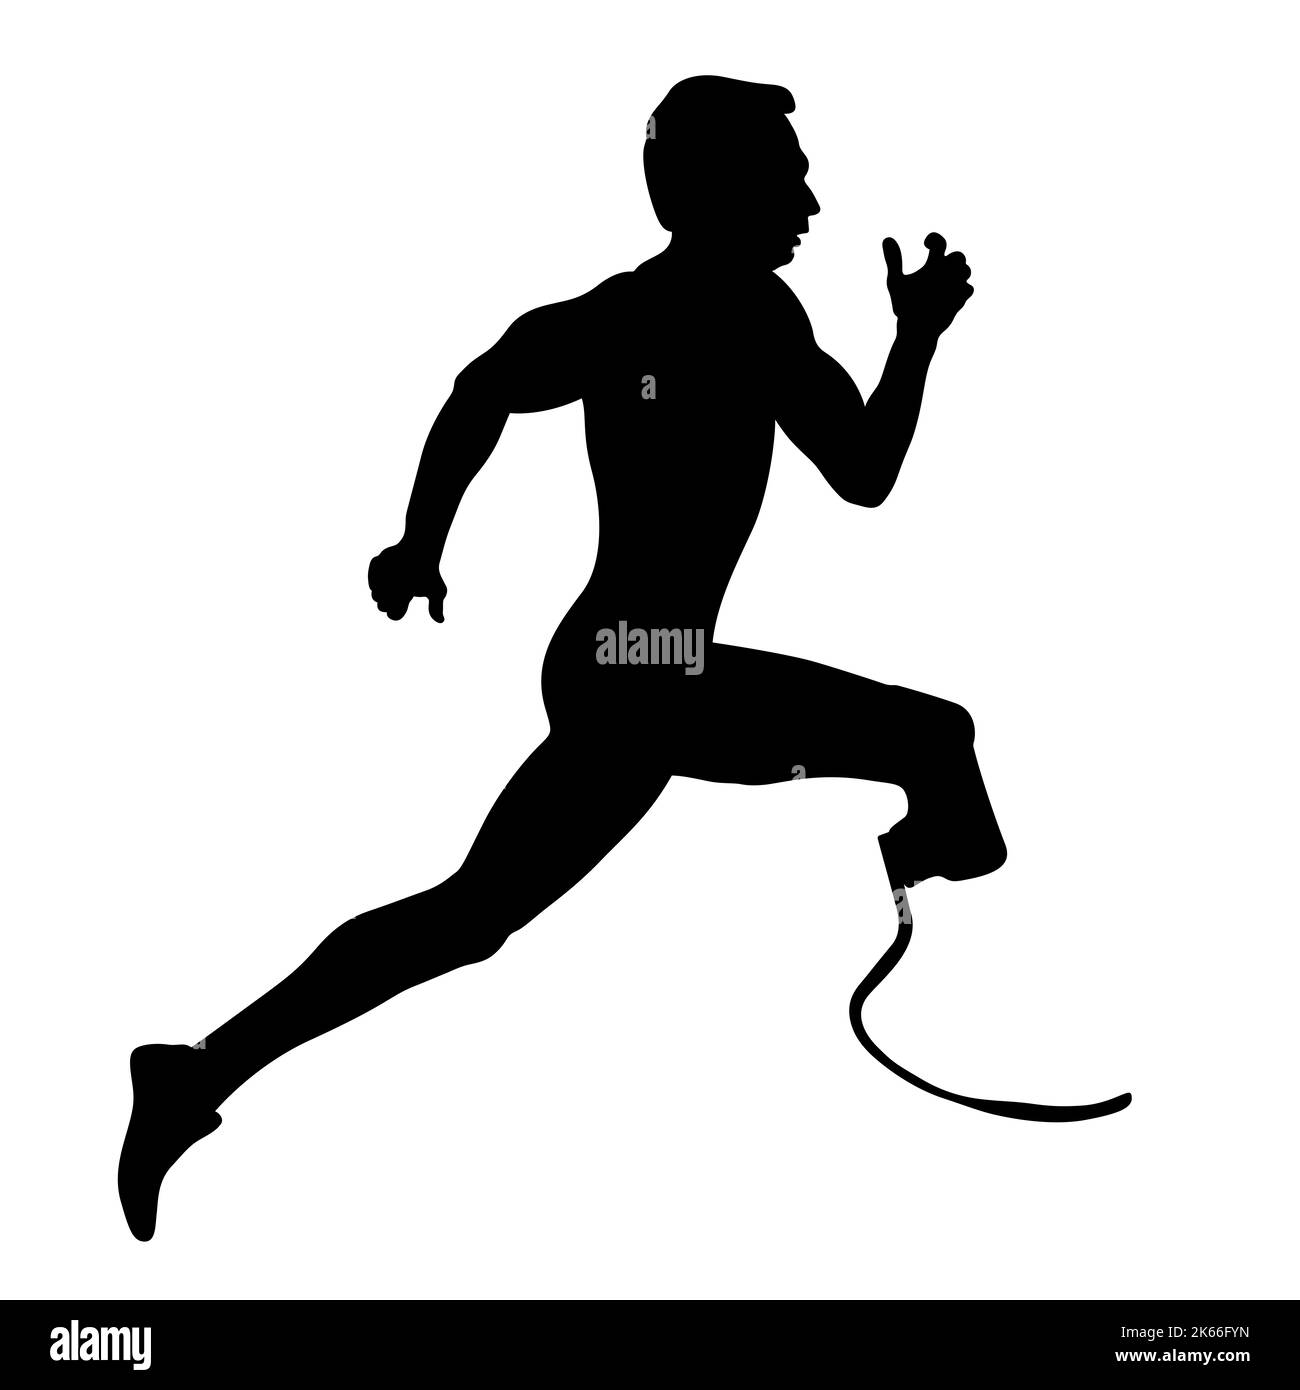 disabled athlete on prosthesis running black silhouette Stock Photo